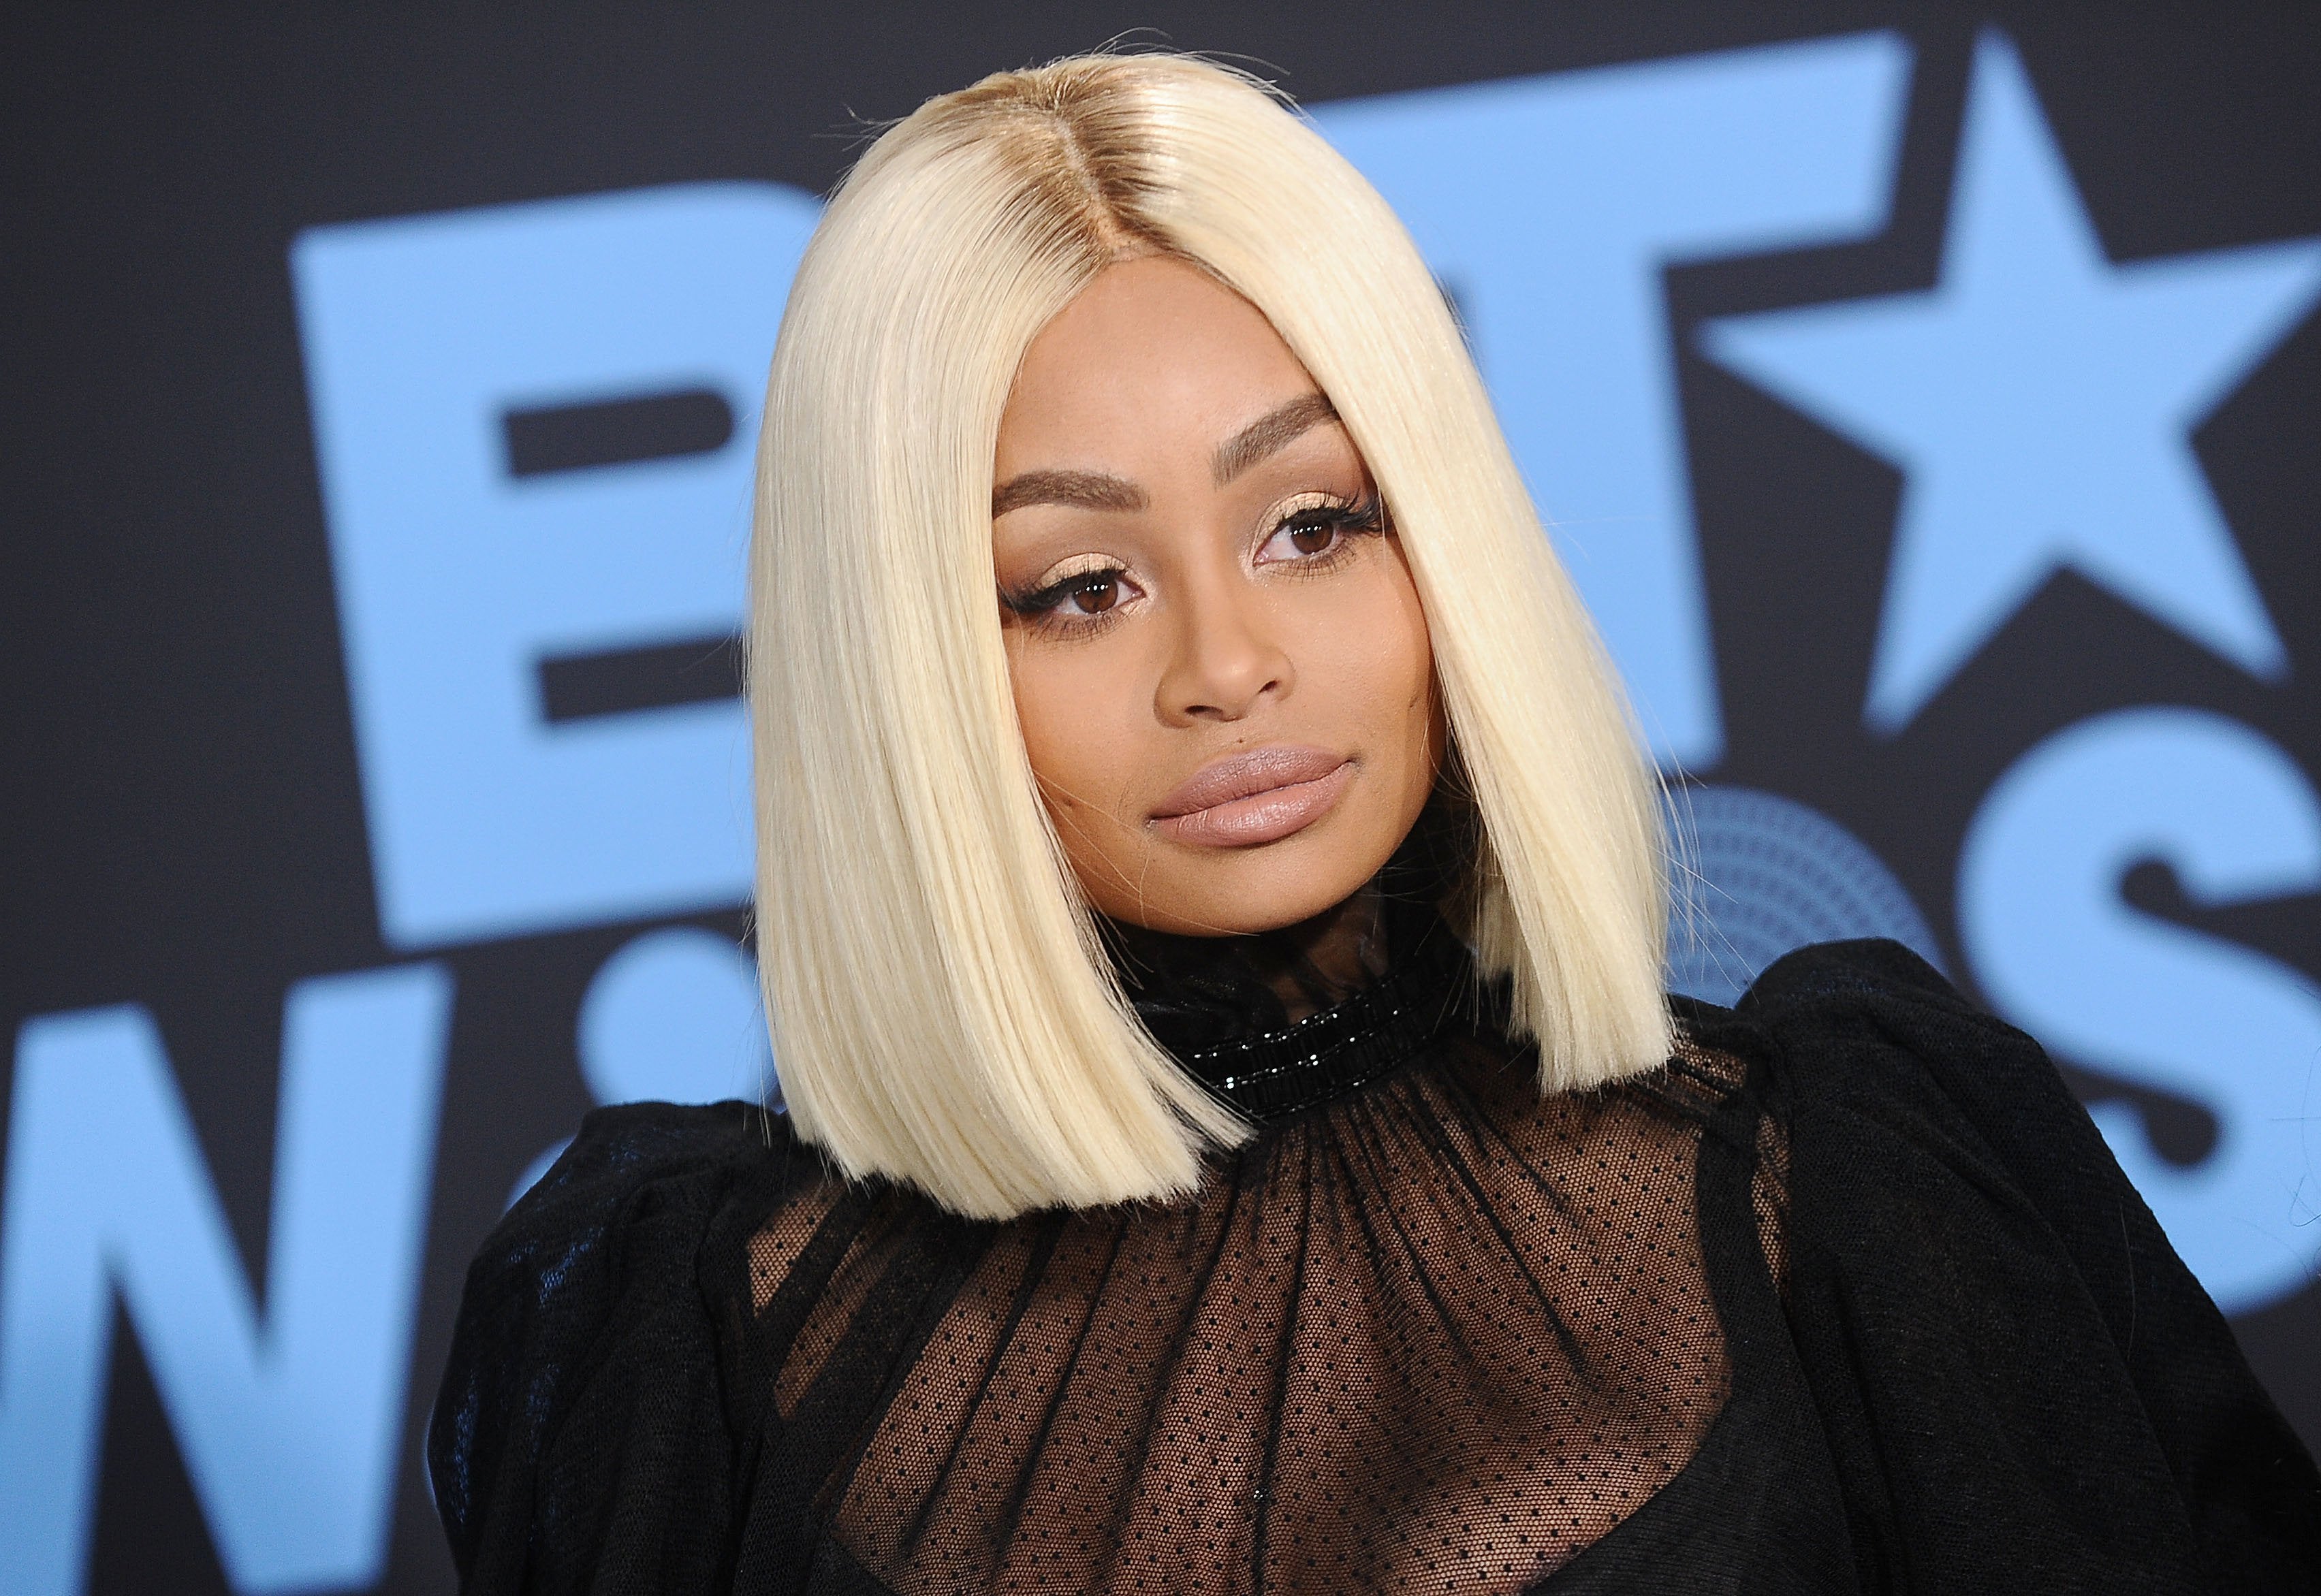 Blac Chyna Is Committed To Bettering Herself And Giving You More 'Angela White' In The Future